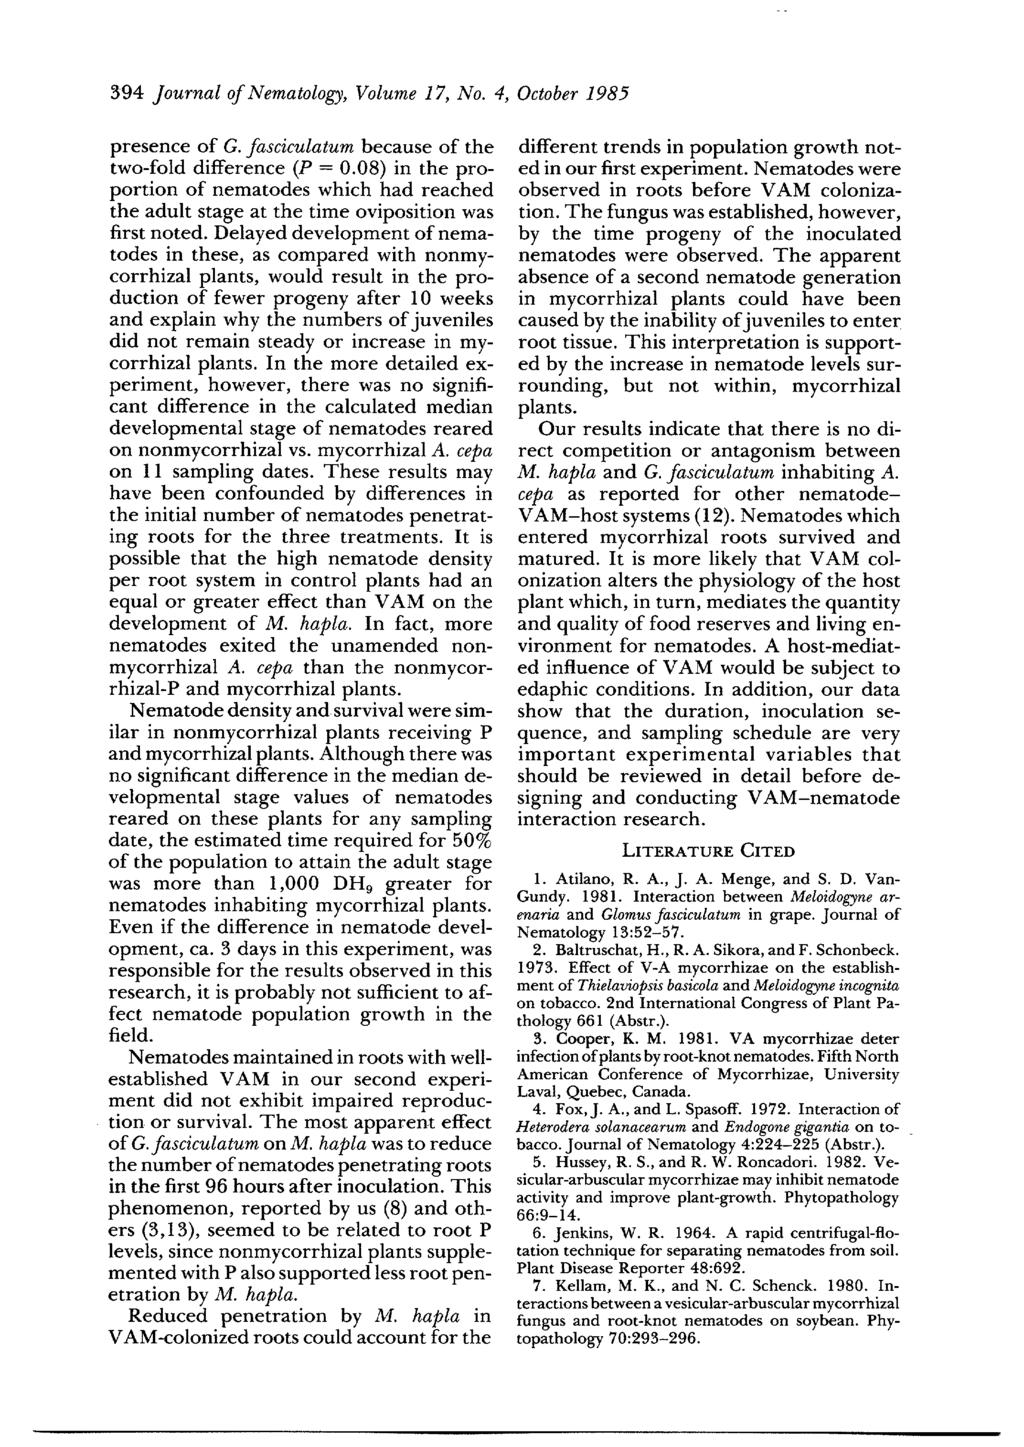 394 Journal of Nematology, Volume 17, No. 4, October 1985 presence of G. fasciculatum because of the two-fold difference (P = 0.